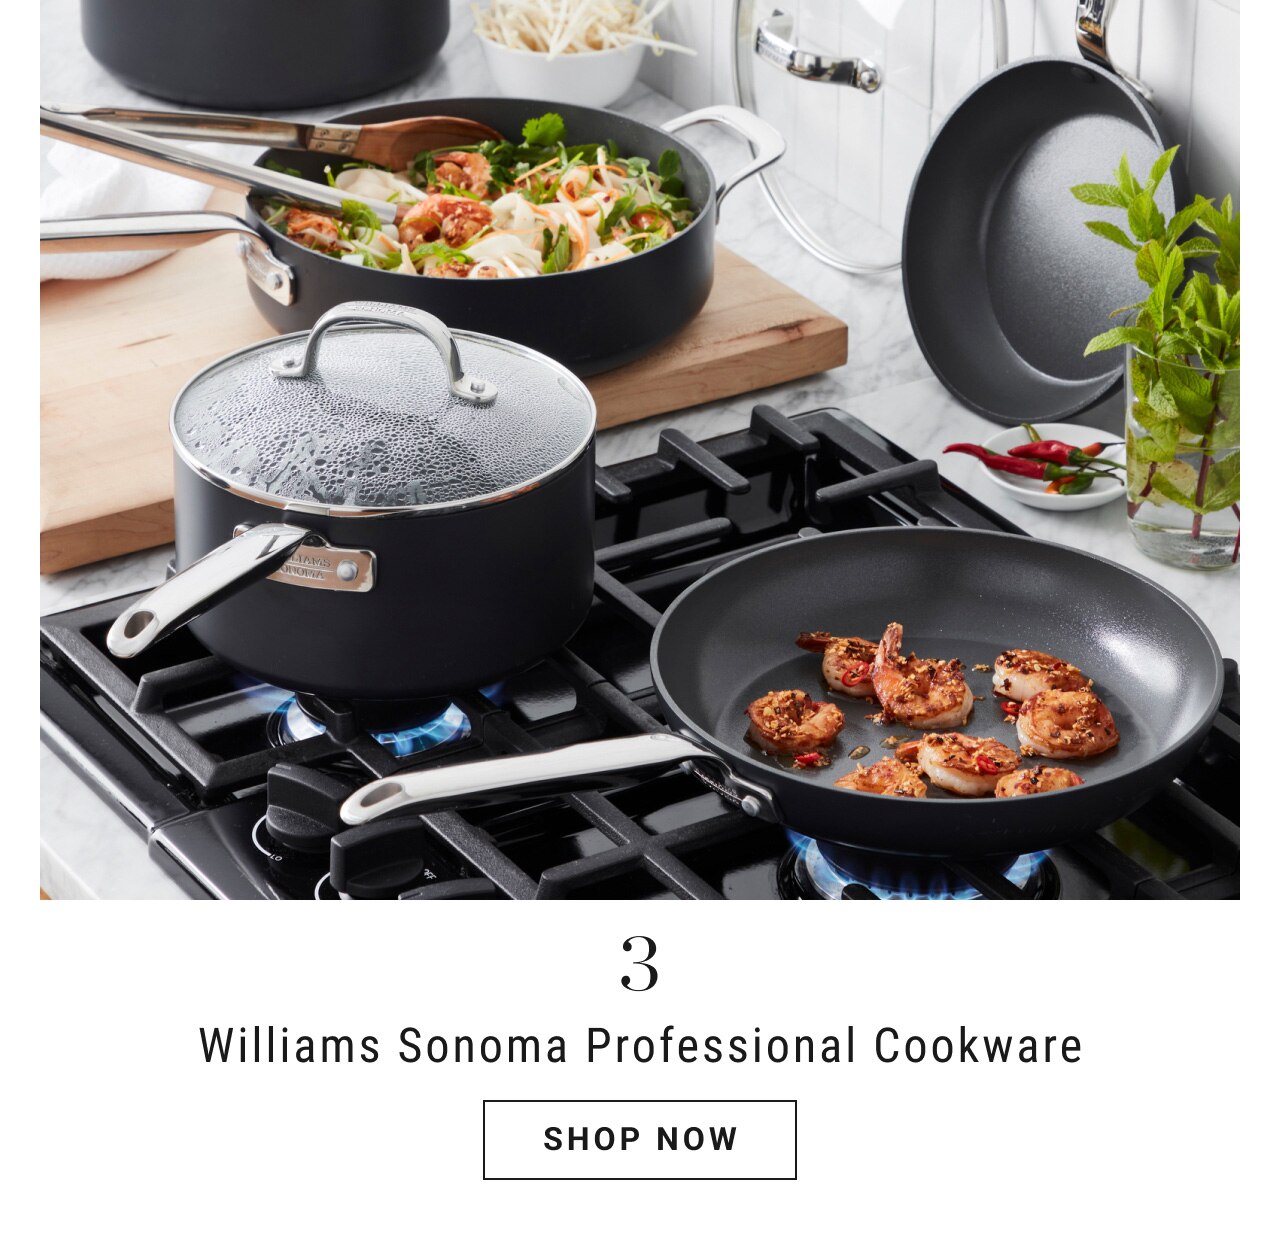  Williams Sonoma Professional Cookware SHOP NOW 